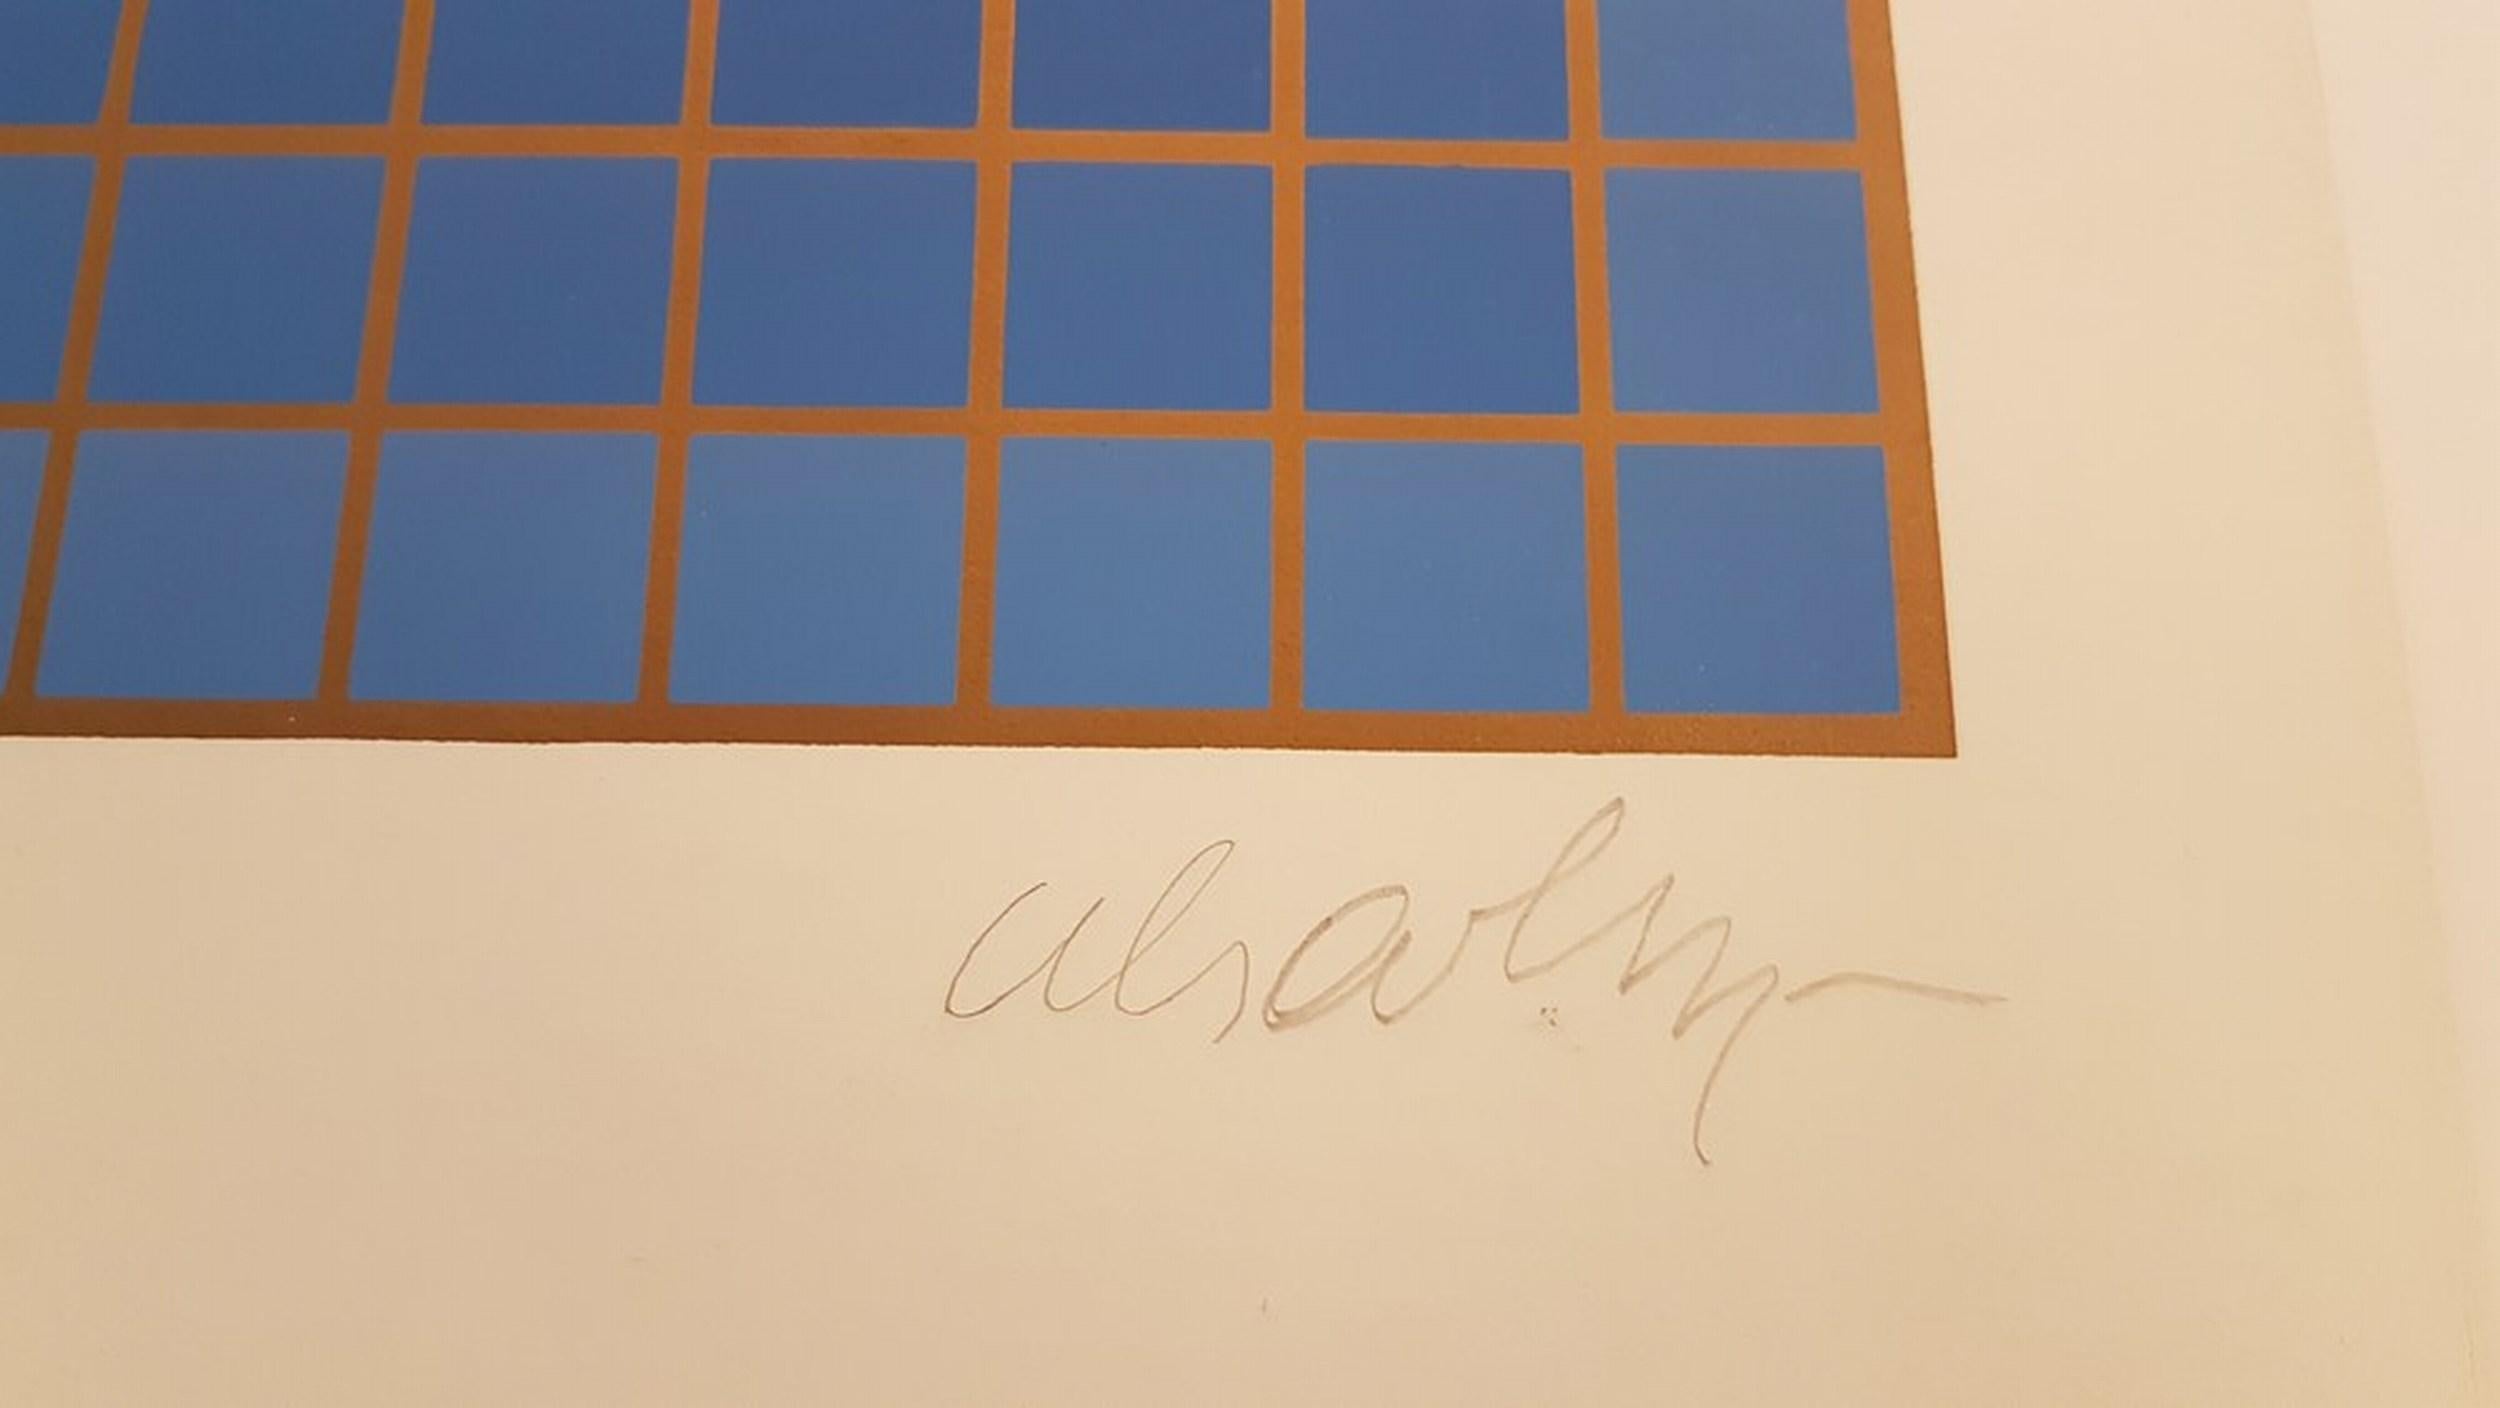 Kinetic Composition, Blue Sphere
Signed and numbered by hand
Edition: 100

Victor Vasarely (9 April 1906 – 15 March 1997), was a Hungarian–French artist, who is widely accepted as a 